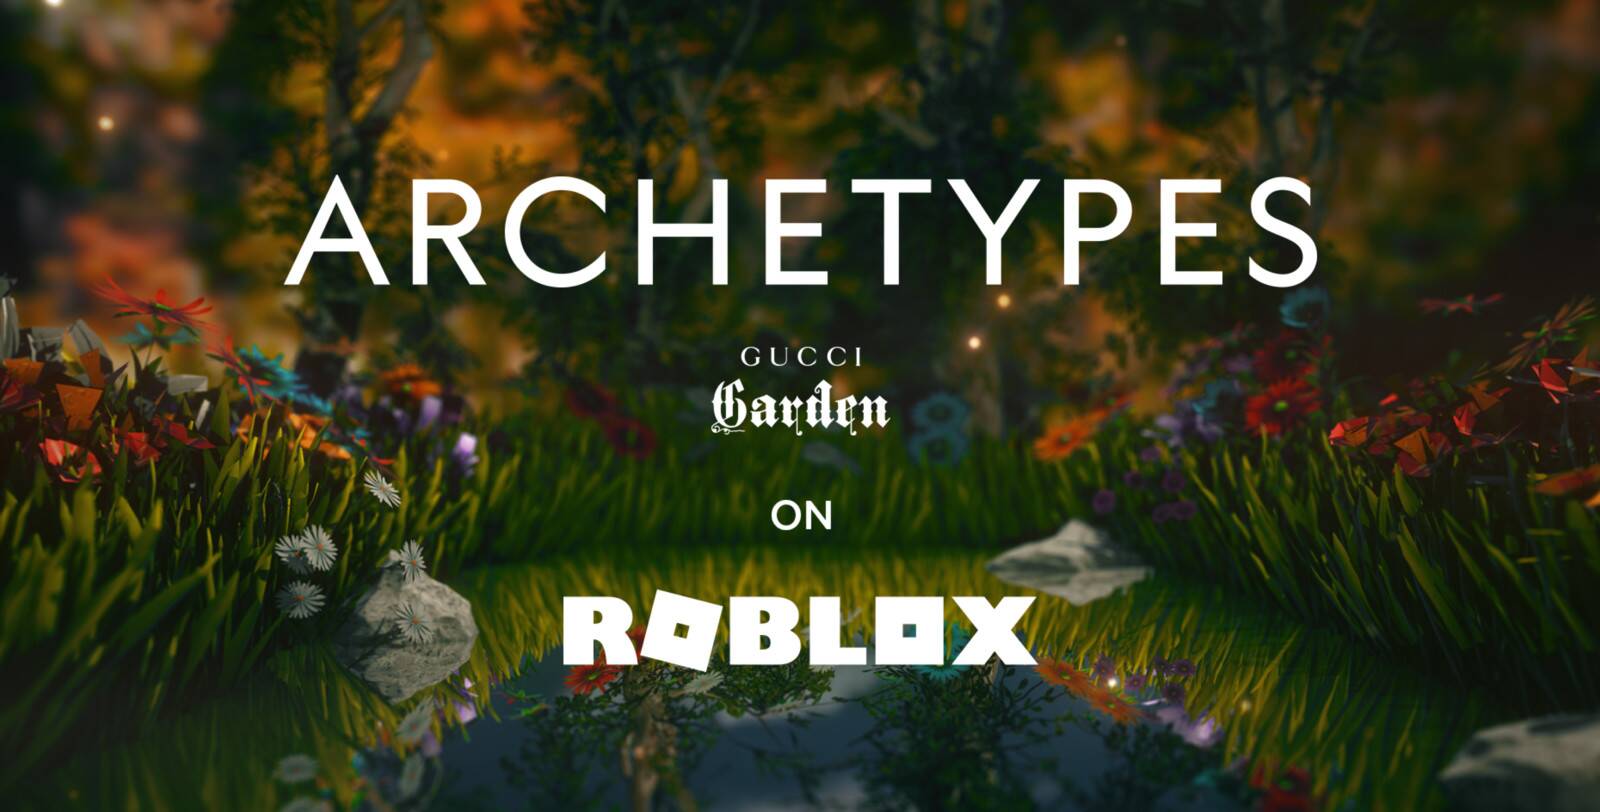 How Digital Fashion Points to the Future of Fashion – Virtual Gucci Garden experience in Roblox™